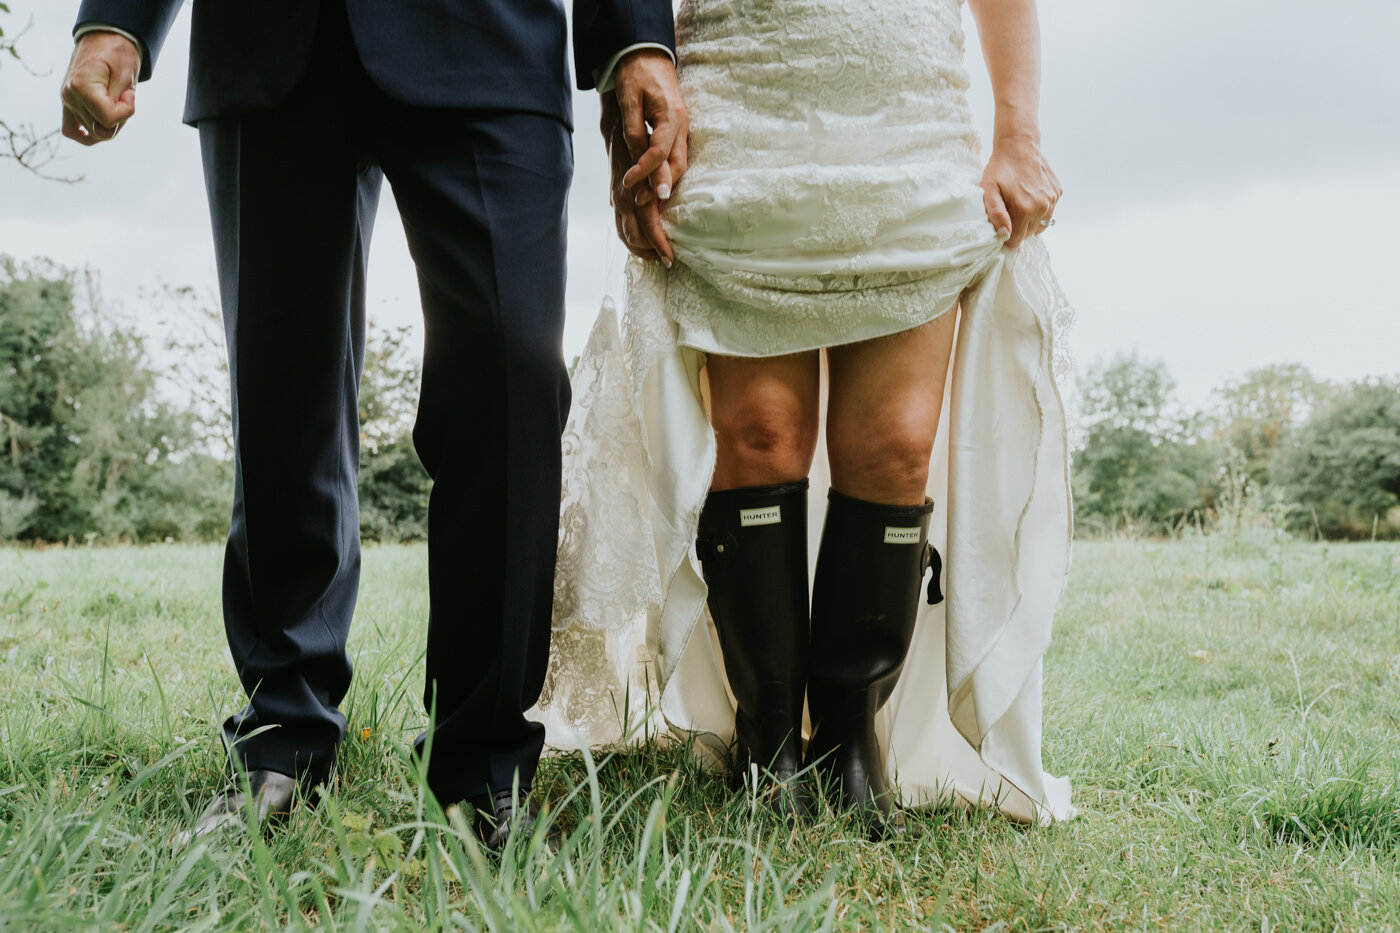 Our kind of countryside wedding! 

Photo by @stevenprebblephotography